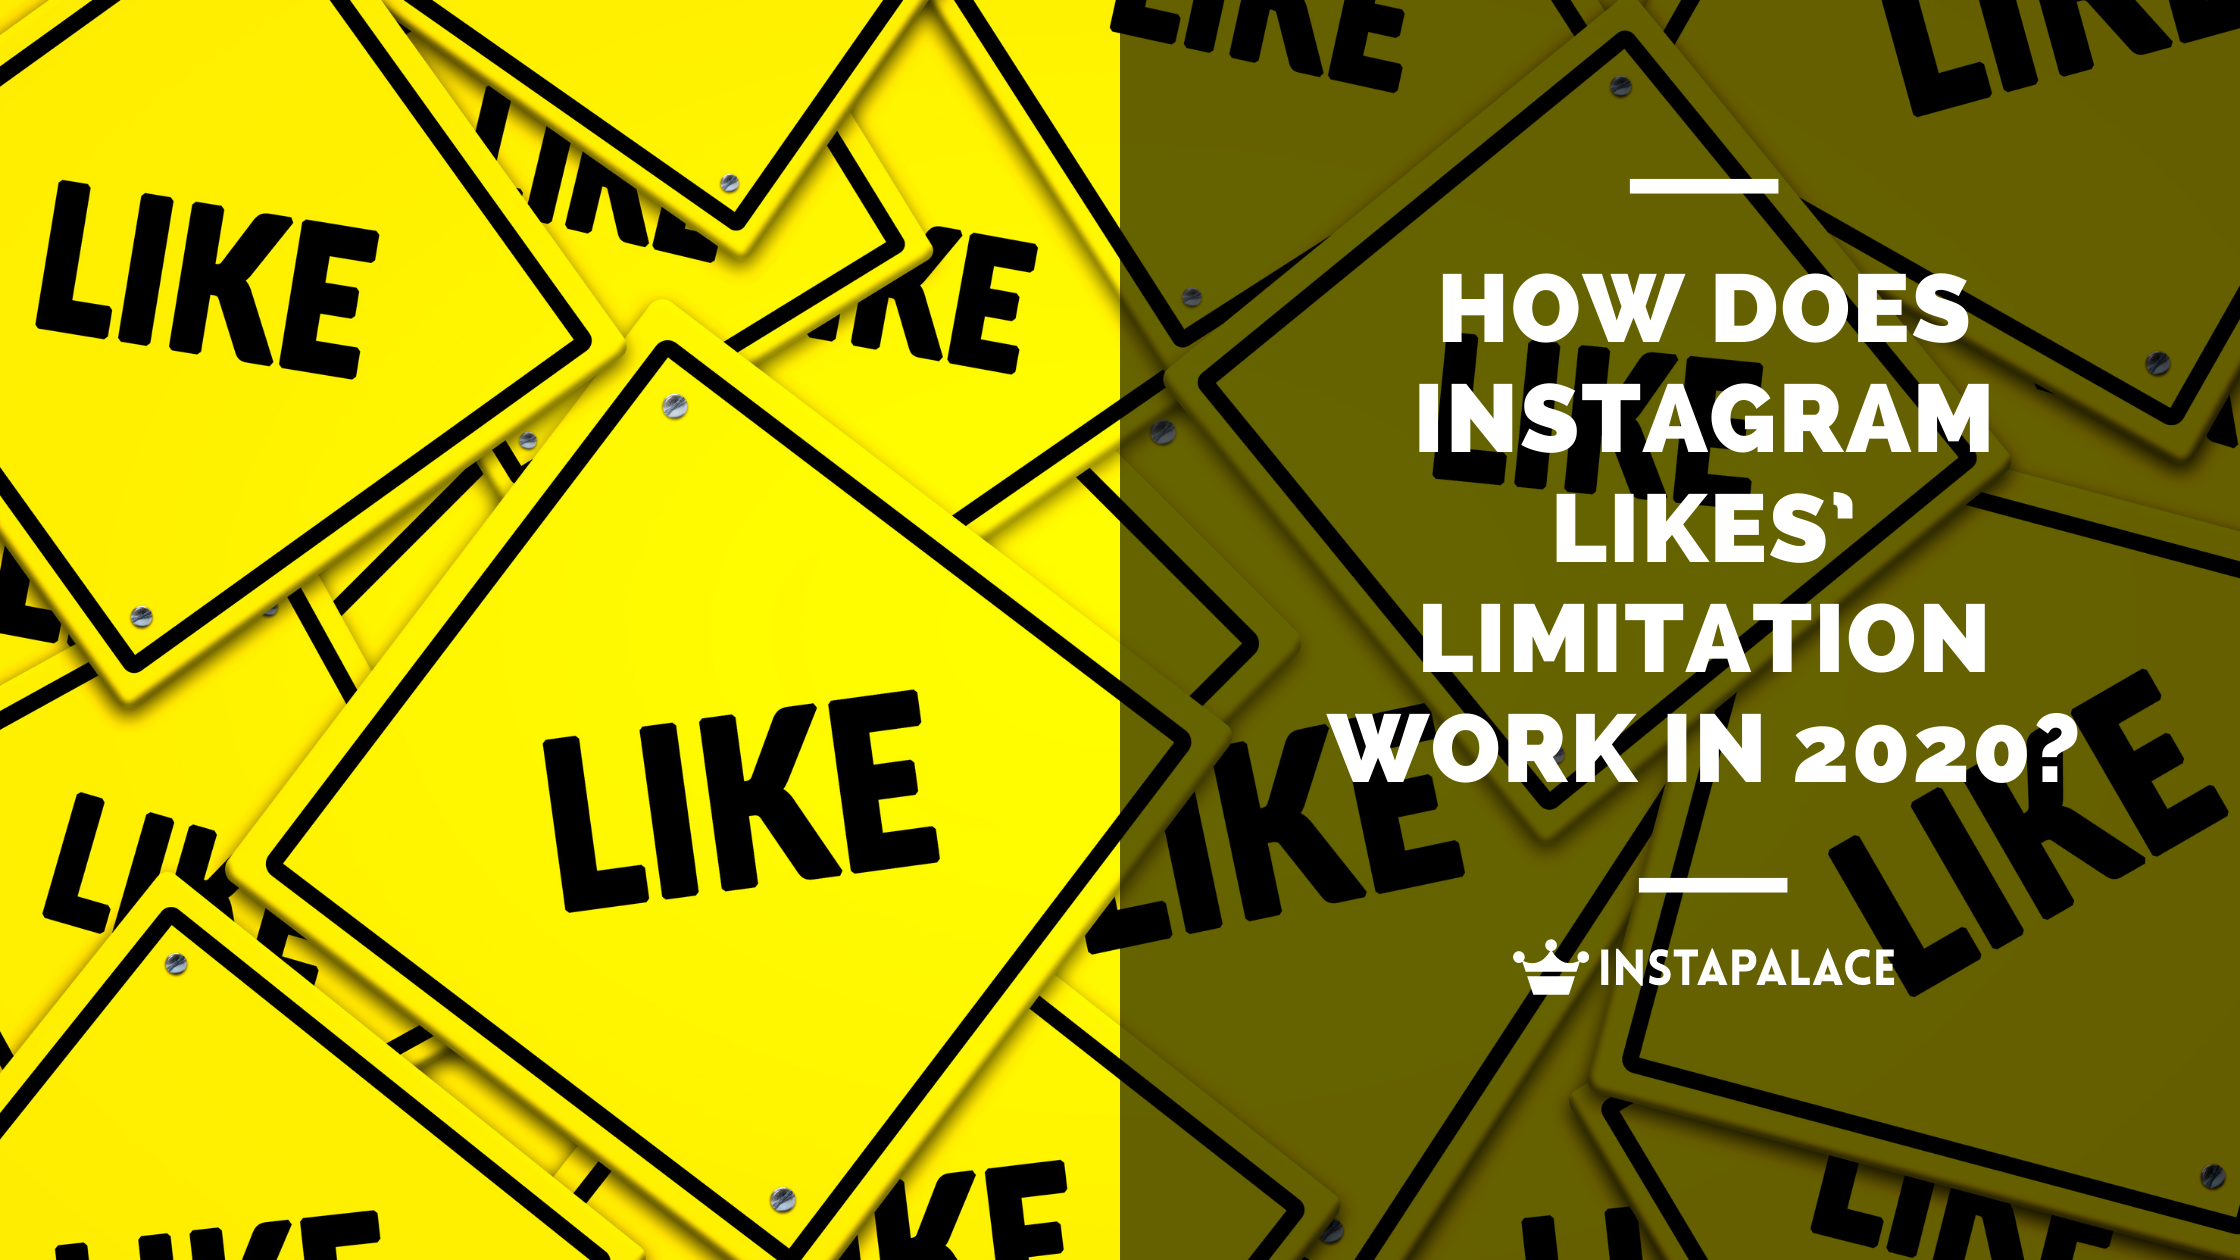 How Does Instagram Likes’ Limitation Work